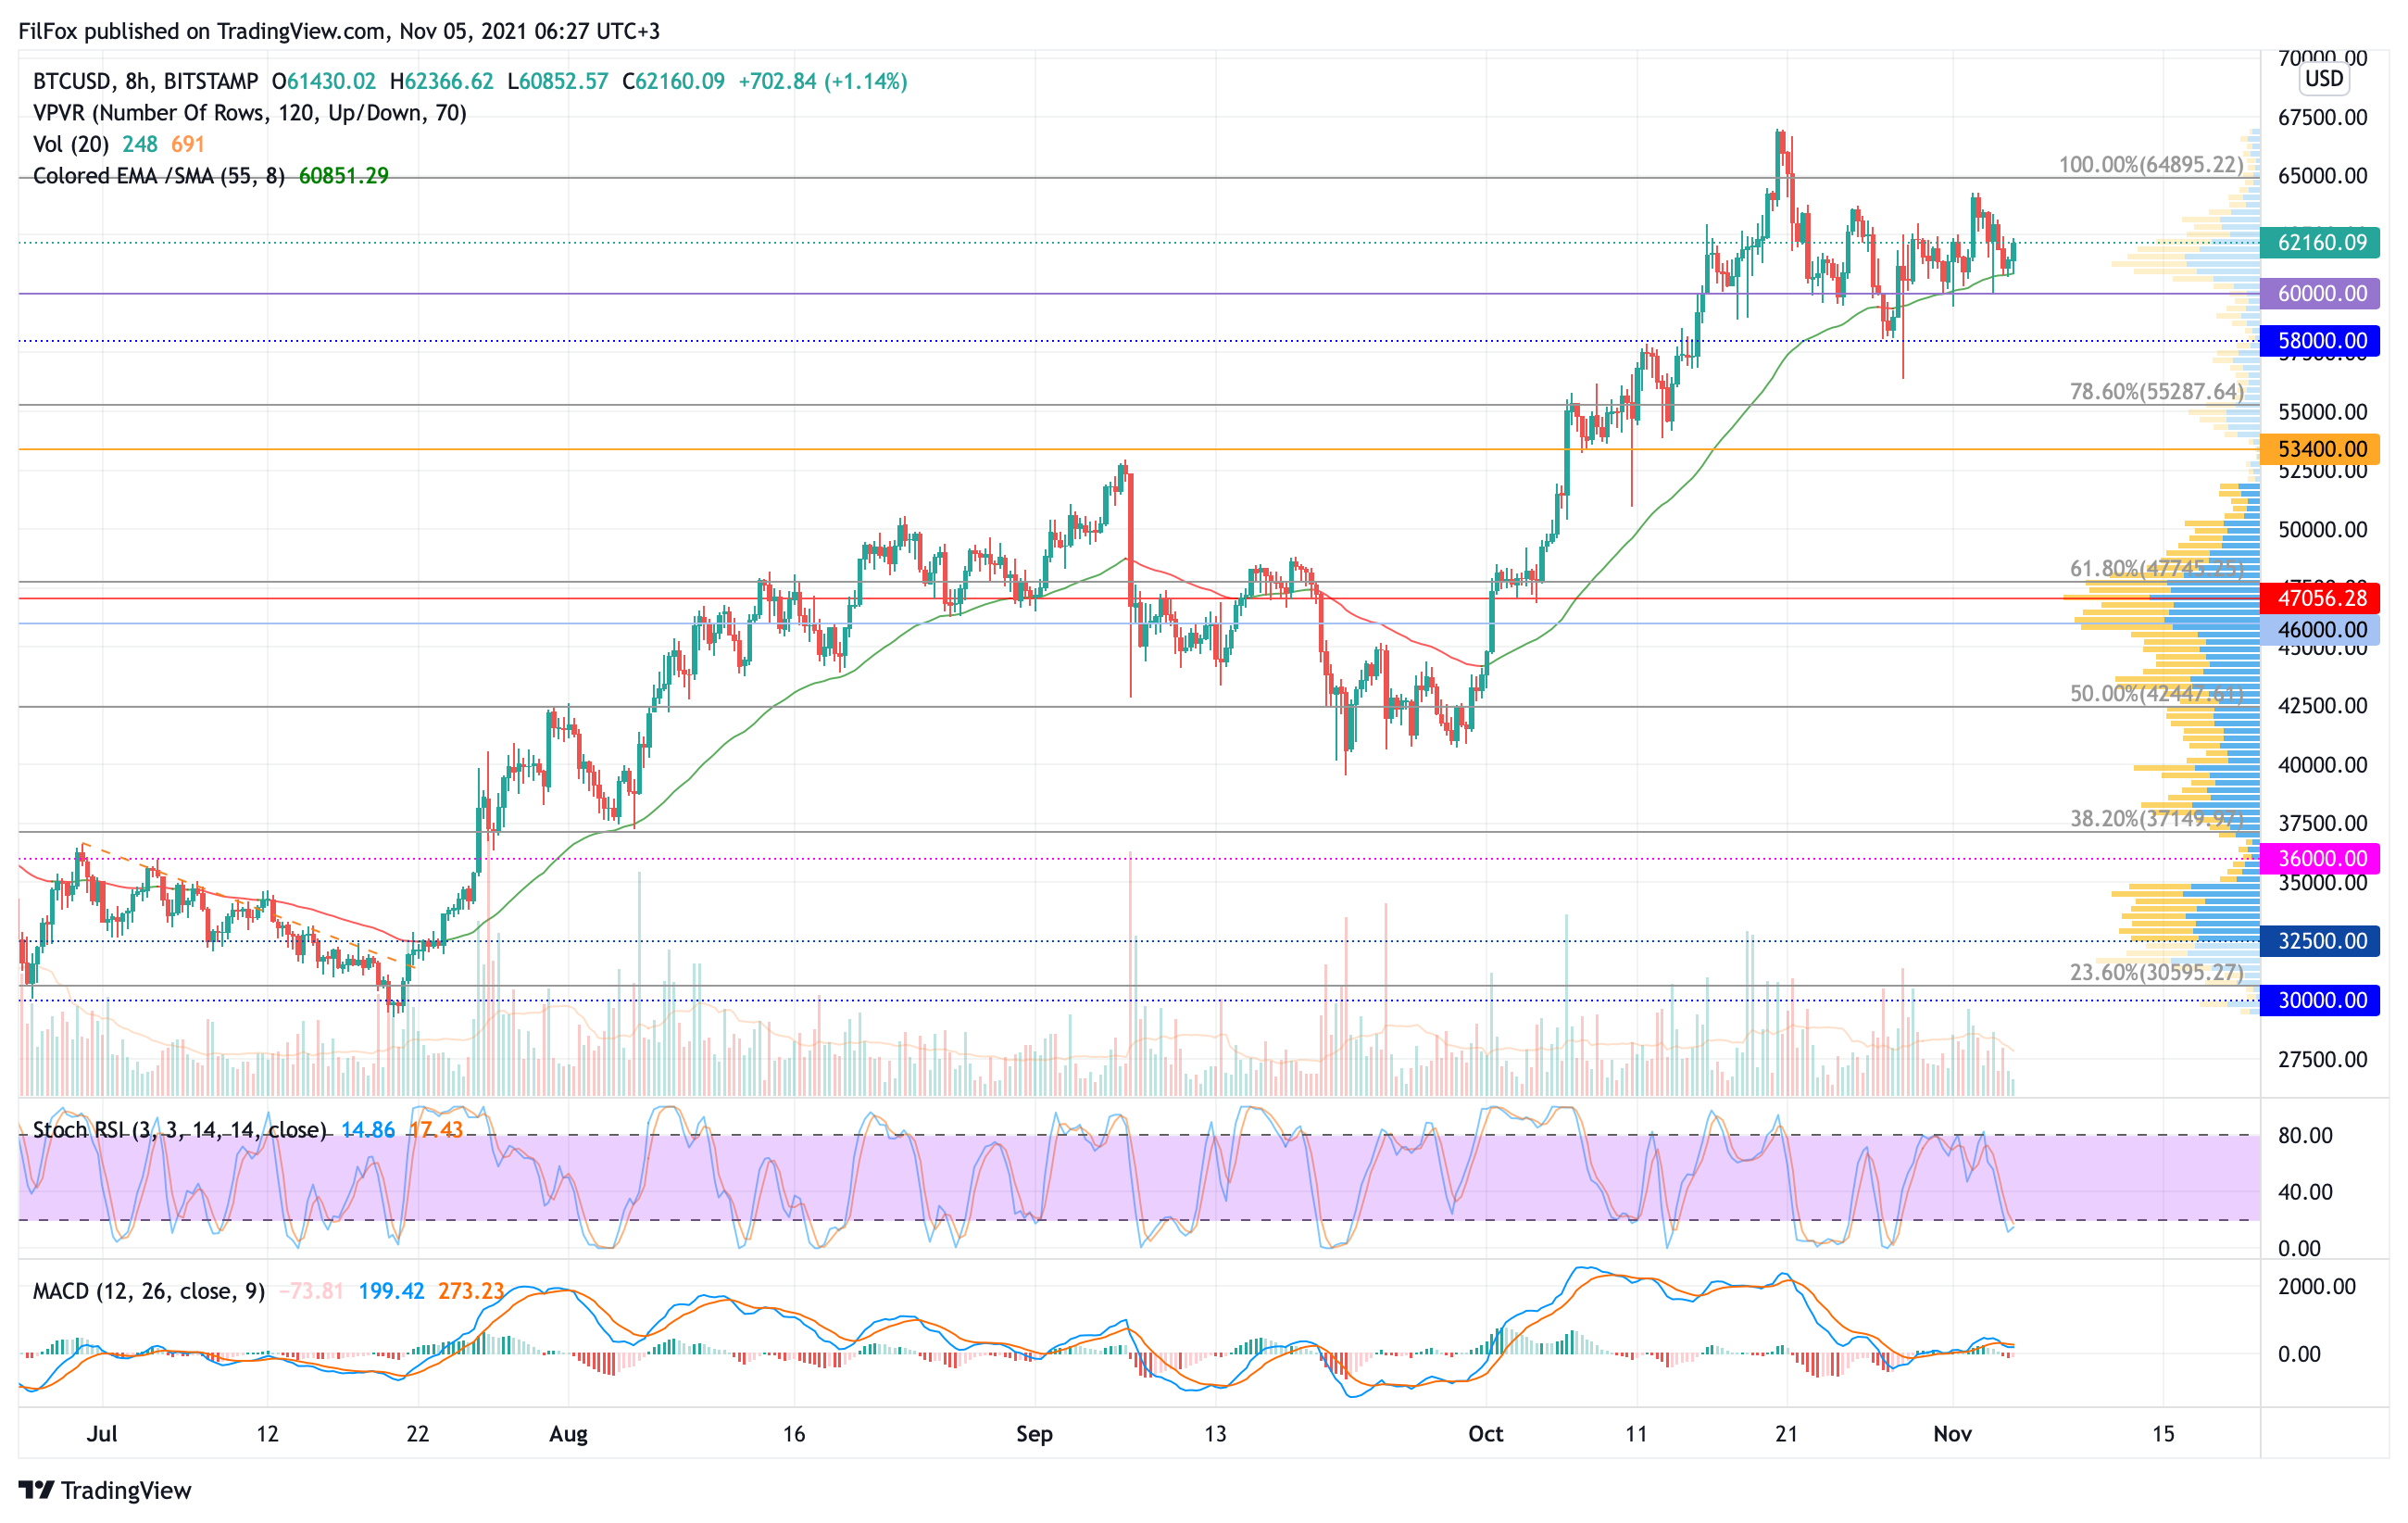 Analysis of prices for Bitcoin, Ethereum, XRP for 11/05/2021